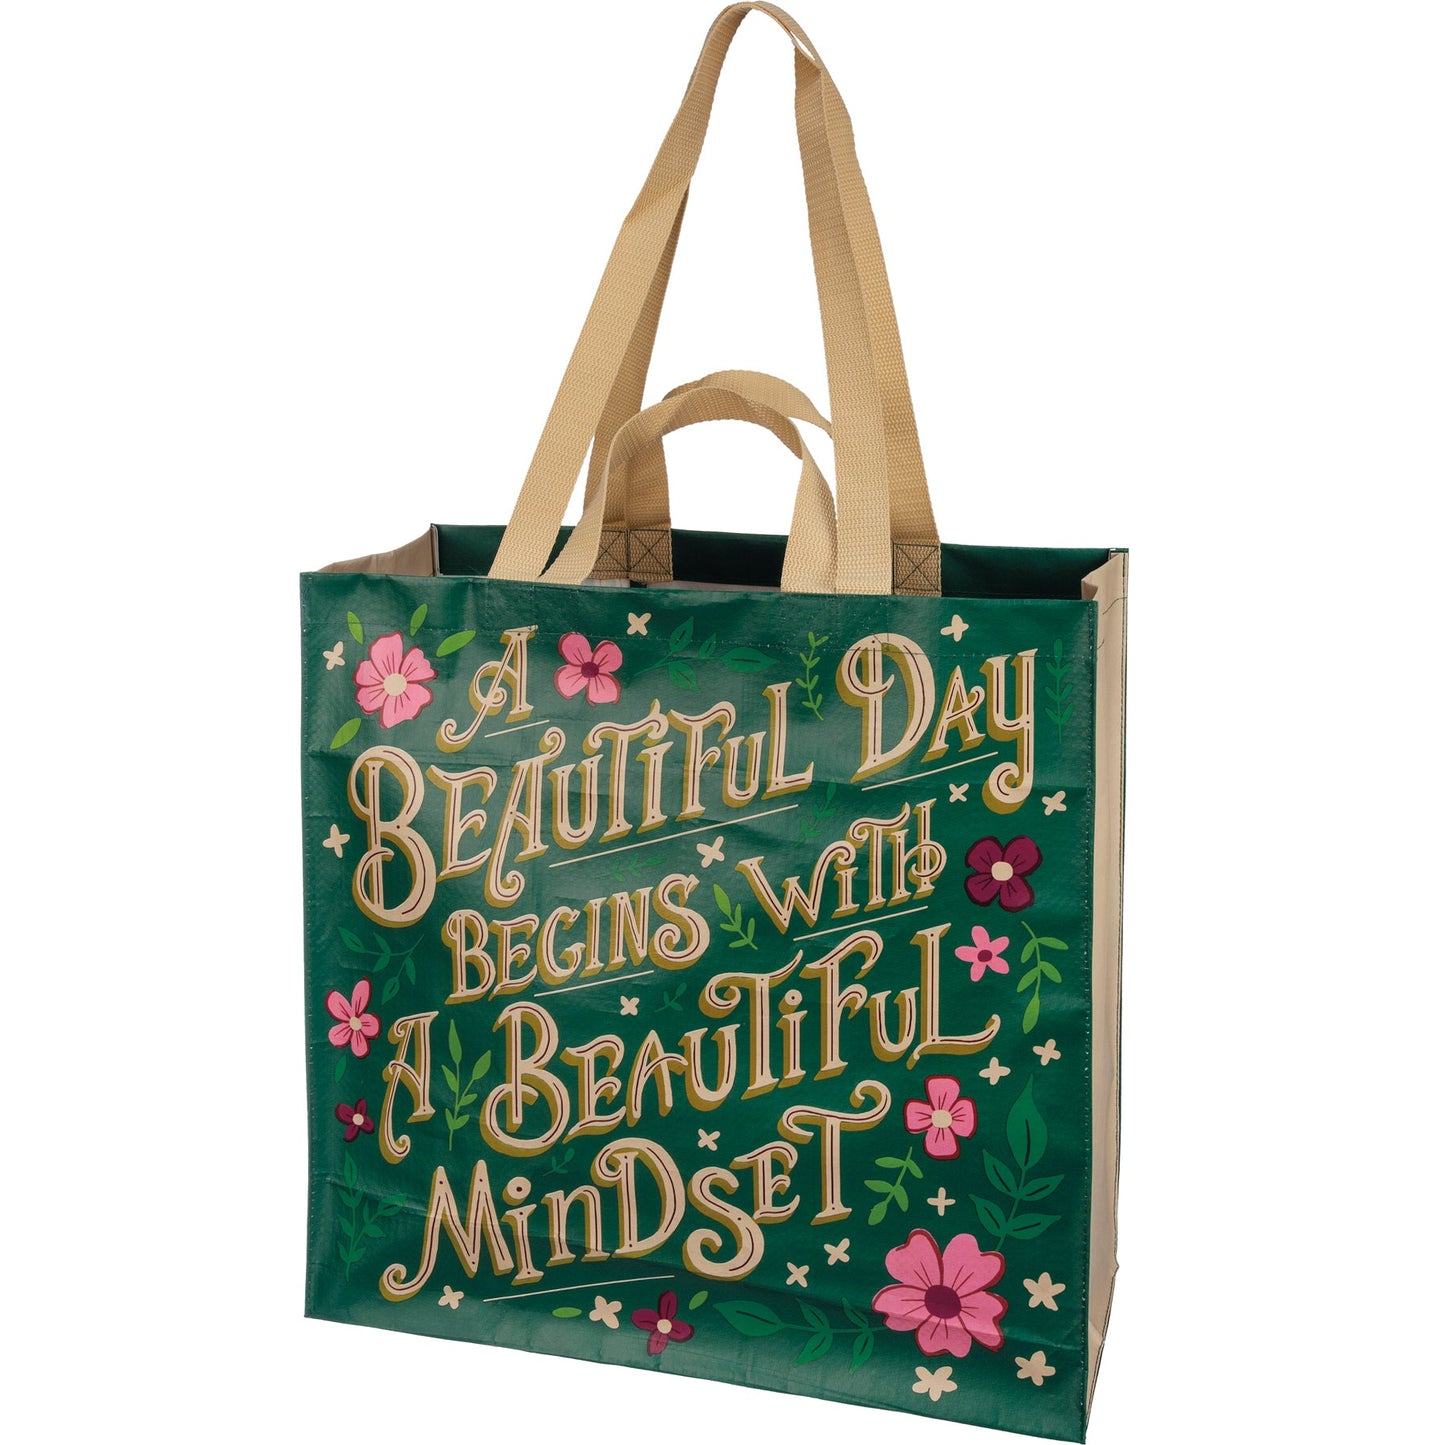 A Beautiful Day Begins With A Beautiful Mindset Floral Market Tote Bag